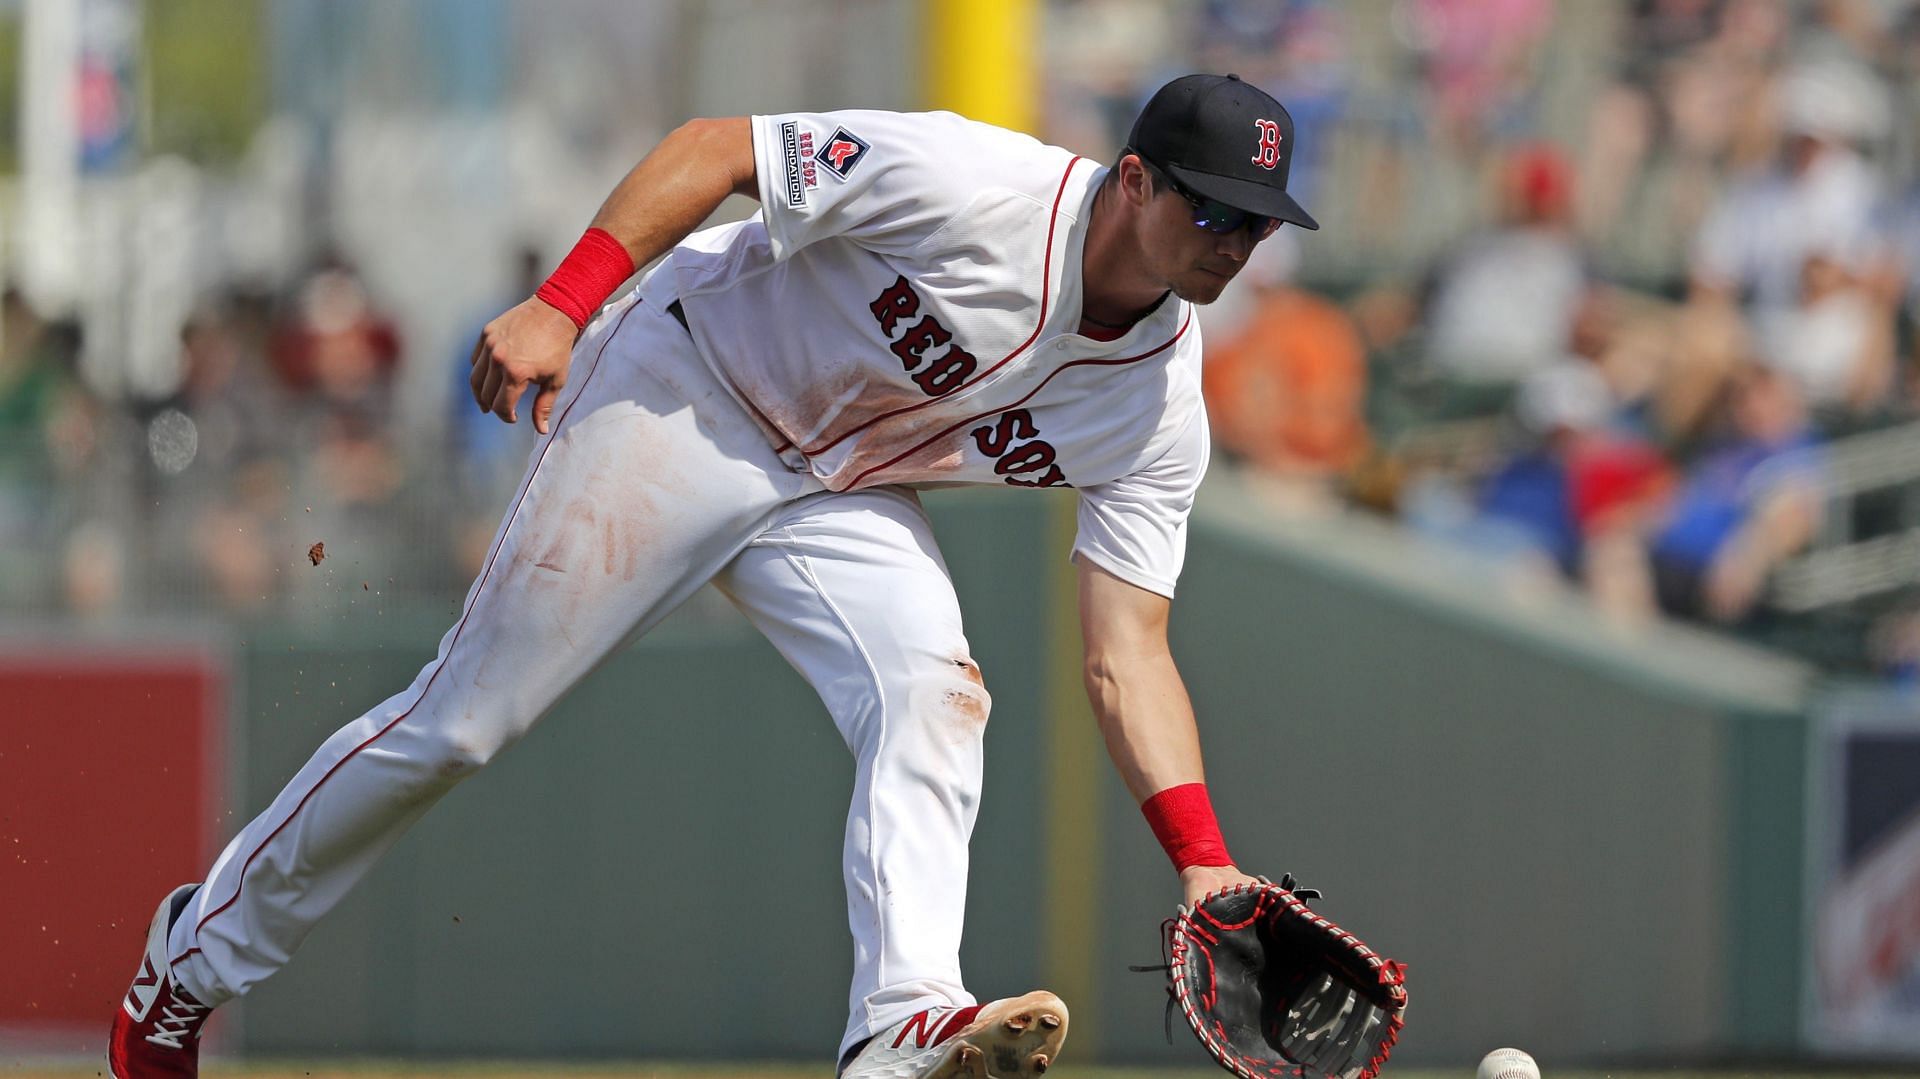 The Boston Red Sox are vying to increase depth of their infield